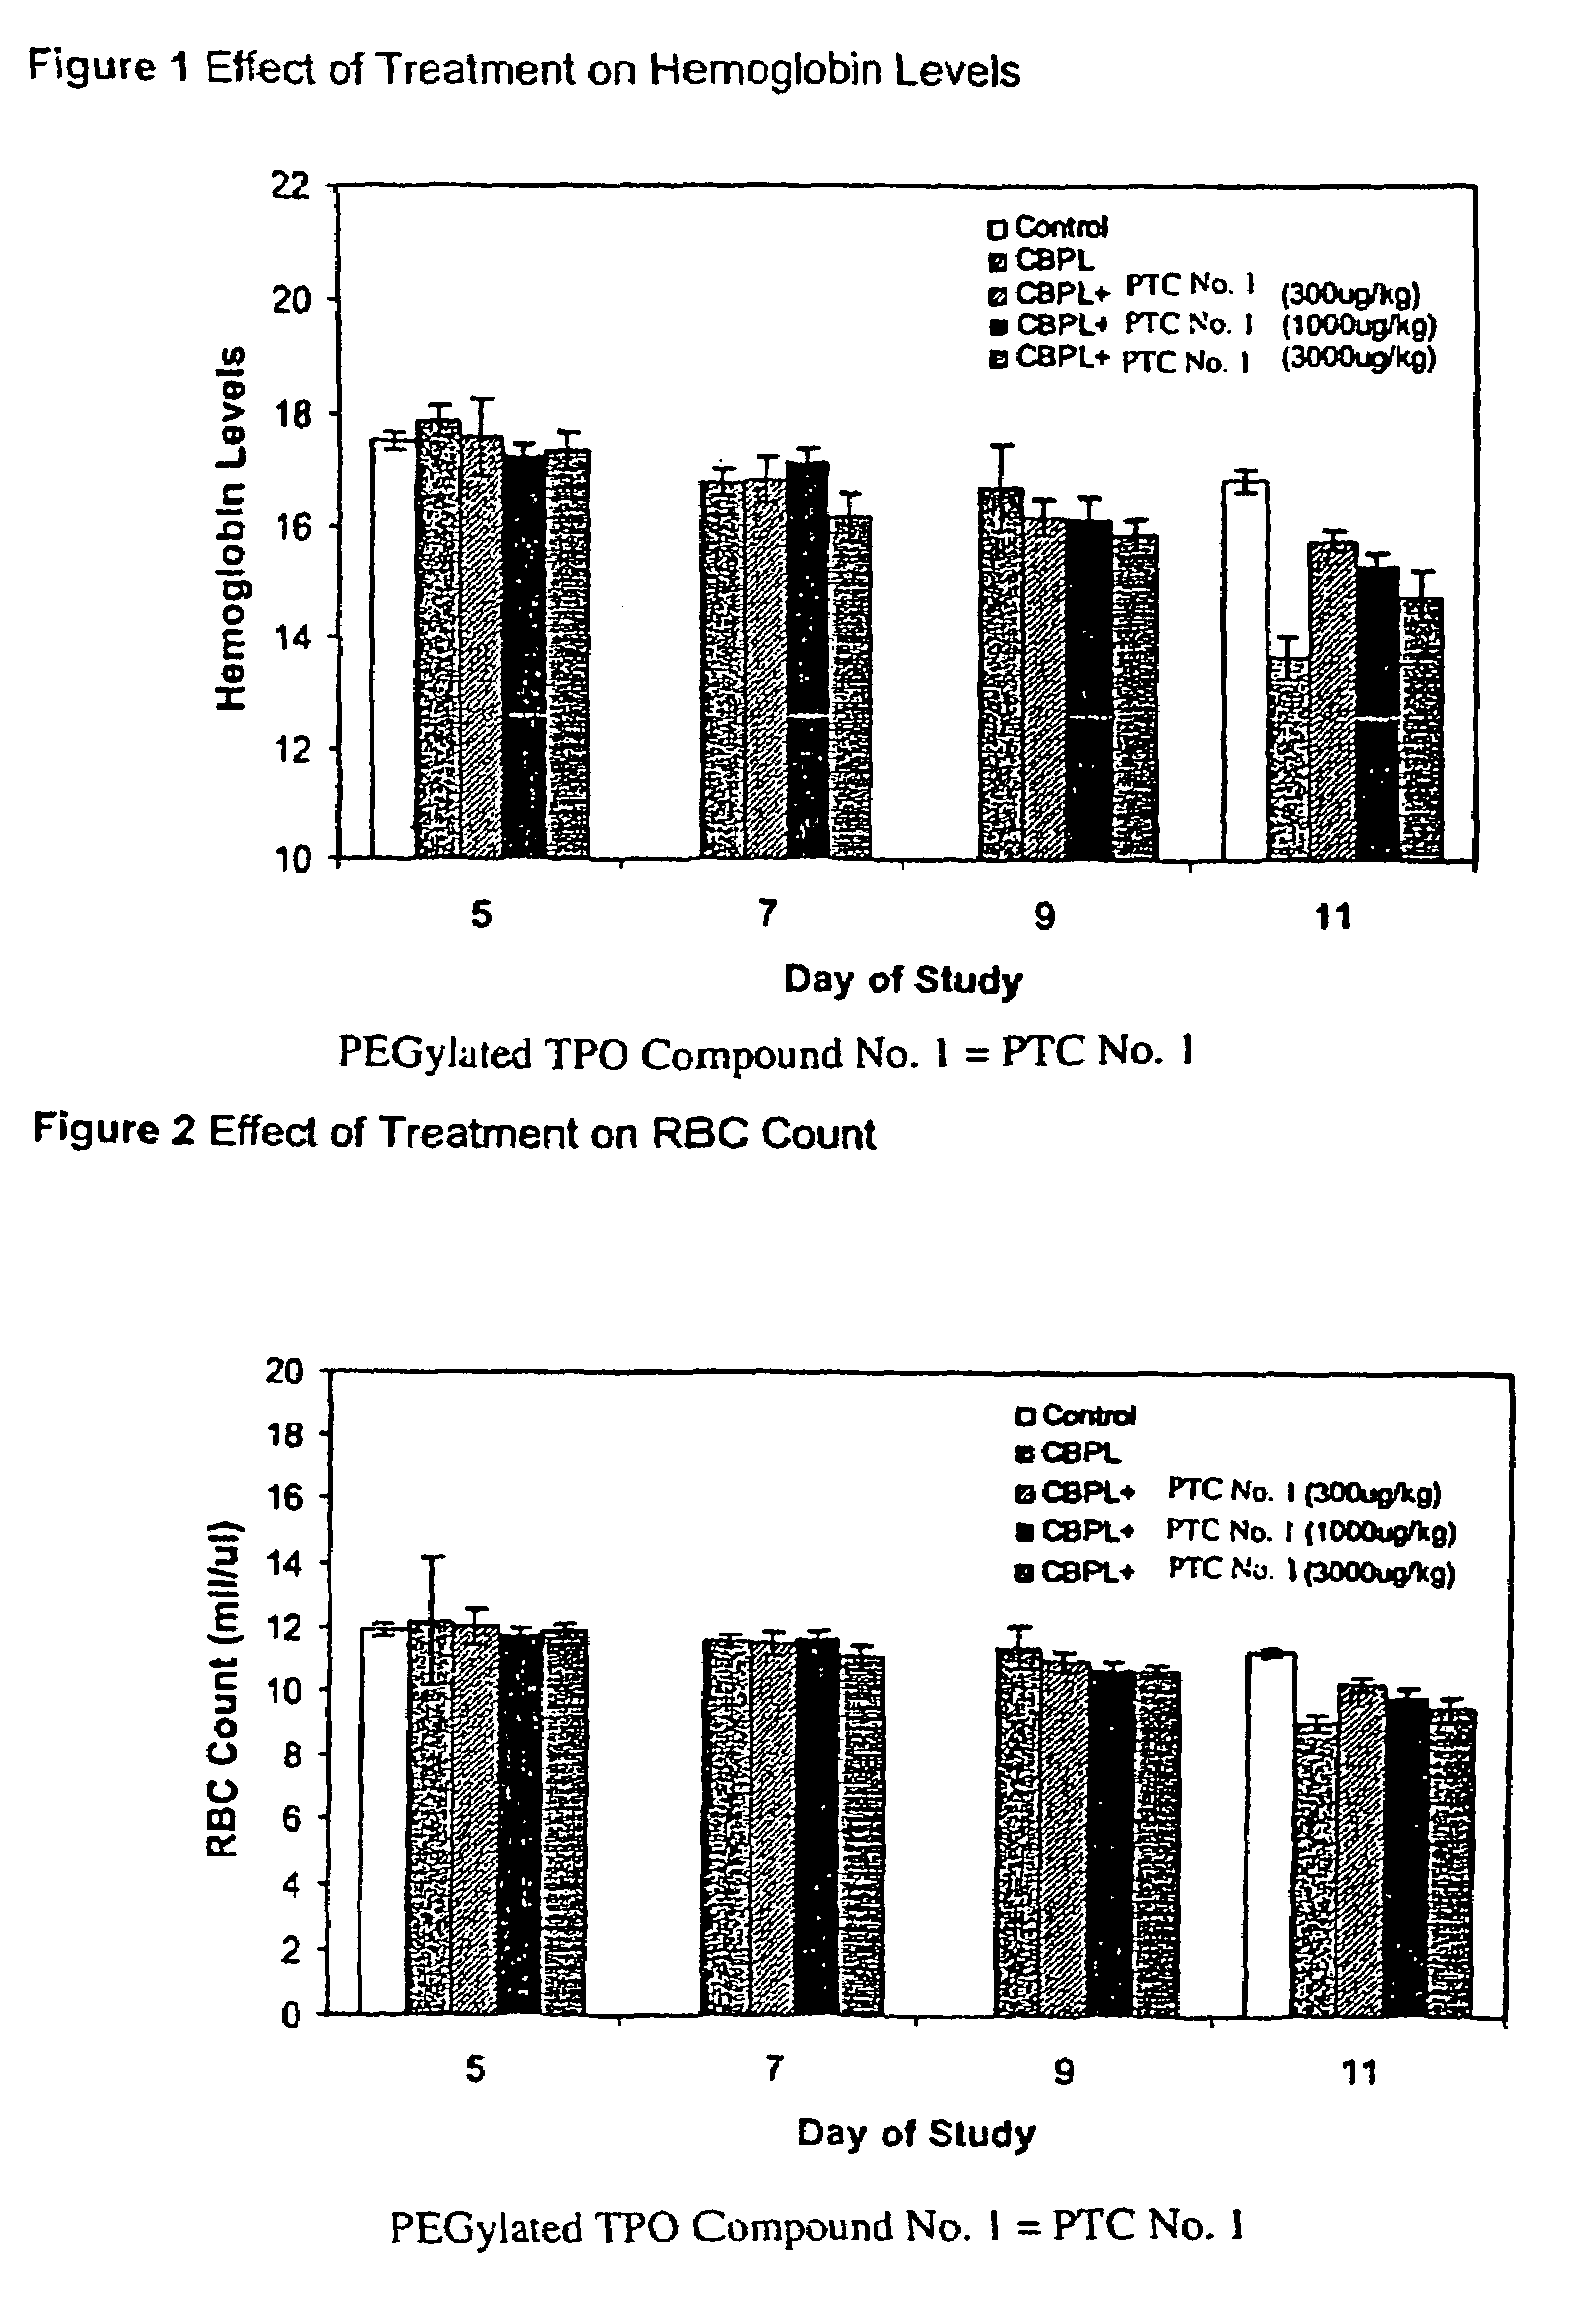 TPO peptide compounds for treatment of anemia